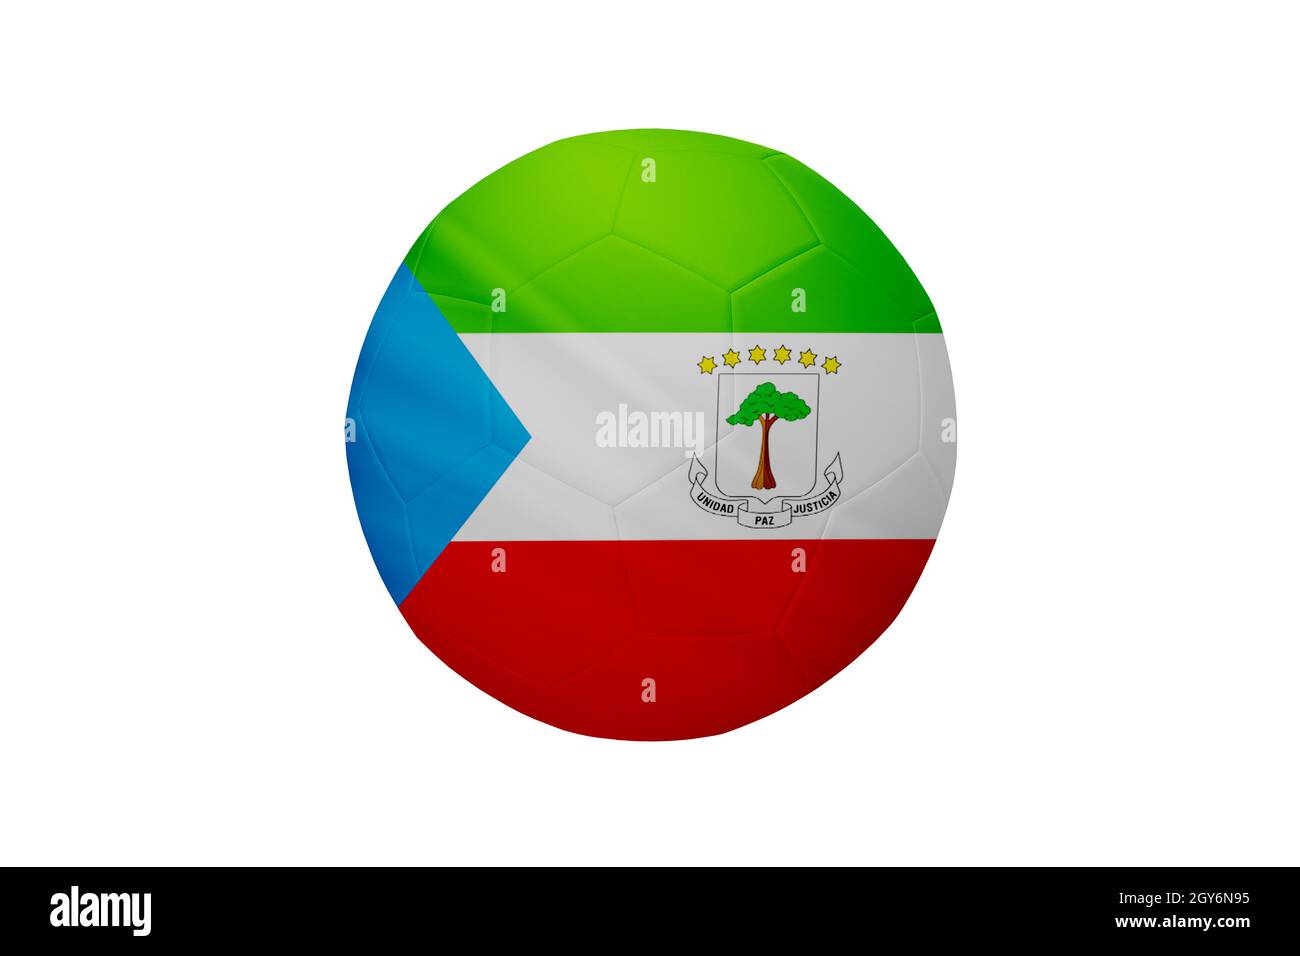 Football in the colors of the Equatorial Guinea flag isolated on white background. In a conceptual championship image supporting Equatorial Guinea. Stock Photo